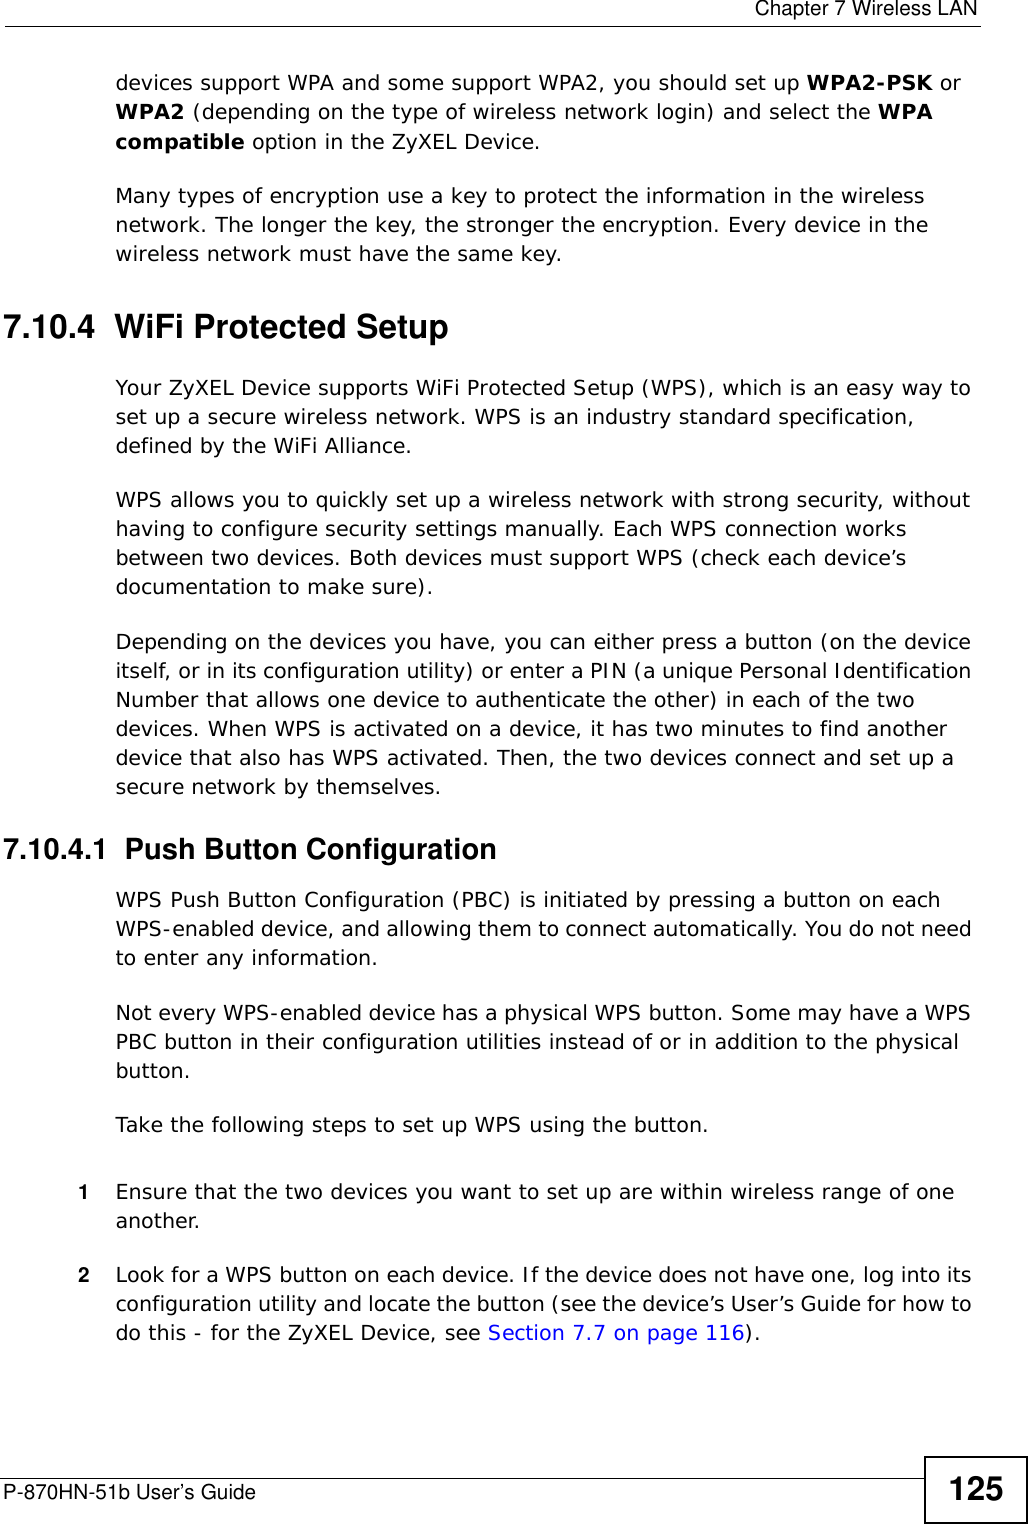  Chapter 7 Wireless LANP-870HN-51b User’s Guide 125devices support WPA and some support WPA2, you should set up WPA2-PSK or WPA2 (depending on the type of wireless network login) and select the WPA compatible option in the ZyXEL Device.Many types of encryption use a key to protect the information in the wireless network. The longer the key, the stronger the encryption. Every device in the wireless network must have the same key.7.10.4  WiFi Protected SetupYour ZyXEL Device supports WiFi Protected Setup (WPS), which is an easy way to set up a secure wireless network. WPS is an industry standard specification, defined by the WiFi Alliance.WPS allows you to quickly set up a wireless network with strong security, without having to configure security settings manually. Each WPS connection works between two devices. Both devices must support WPS (check each device’s documentation to make sure). Depending on the devices you have, you can either press a button (on the device itself, or in its configuration utility) or enter a PIN (a unique Personal Identification Number that allows one device to authenticate the other) in each of the two devices. When WPS is activated on a device, it has two minutes to find another device that also has WPS activated. Then, the two devices connect and set up a secure network by themselves.7.10.4.1  Push Button ConfigurationWPS Push Button Configuration (PBC) is initiated by pressing a button on each WPS-enabled device, and allowing them to connect automatically. You do not need to enter any information. Not every WPS-enabled device has a physical WPS button. Some may have a WPS PBC button in their configuration utilities instead of or in addition to the physical button.Take the following steps to set up WPS using the button.1Ensure that the two devices you want to set up are within wireless range of one another. 2Look for a WPS button on each device. If the device does not have one, log into its configuration utility and locate the button (see the device’s User’s Guide for how to do this - for the ZyXEL Device, see Section 7.7 on page 116).